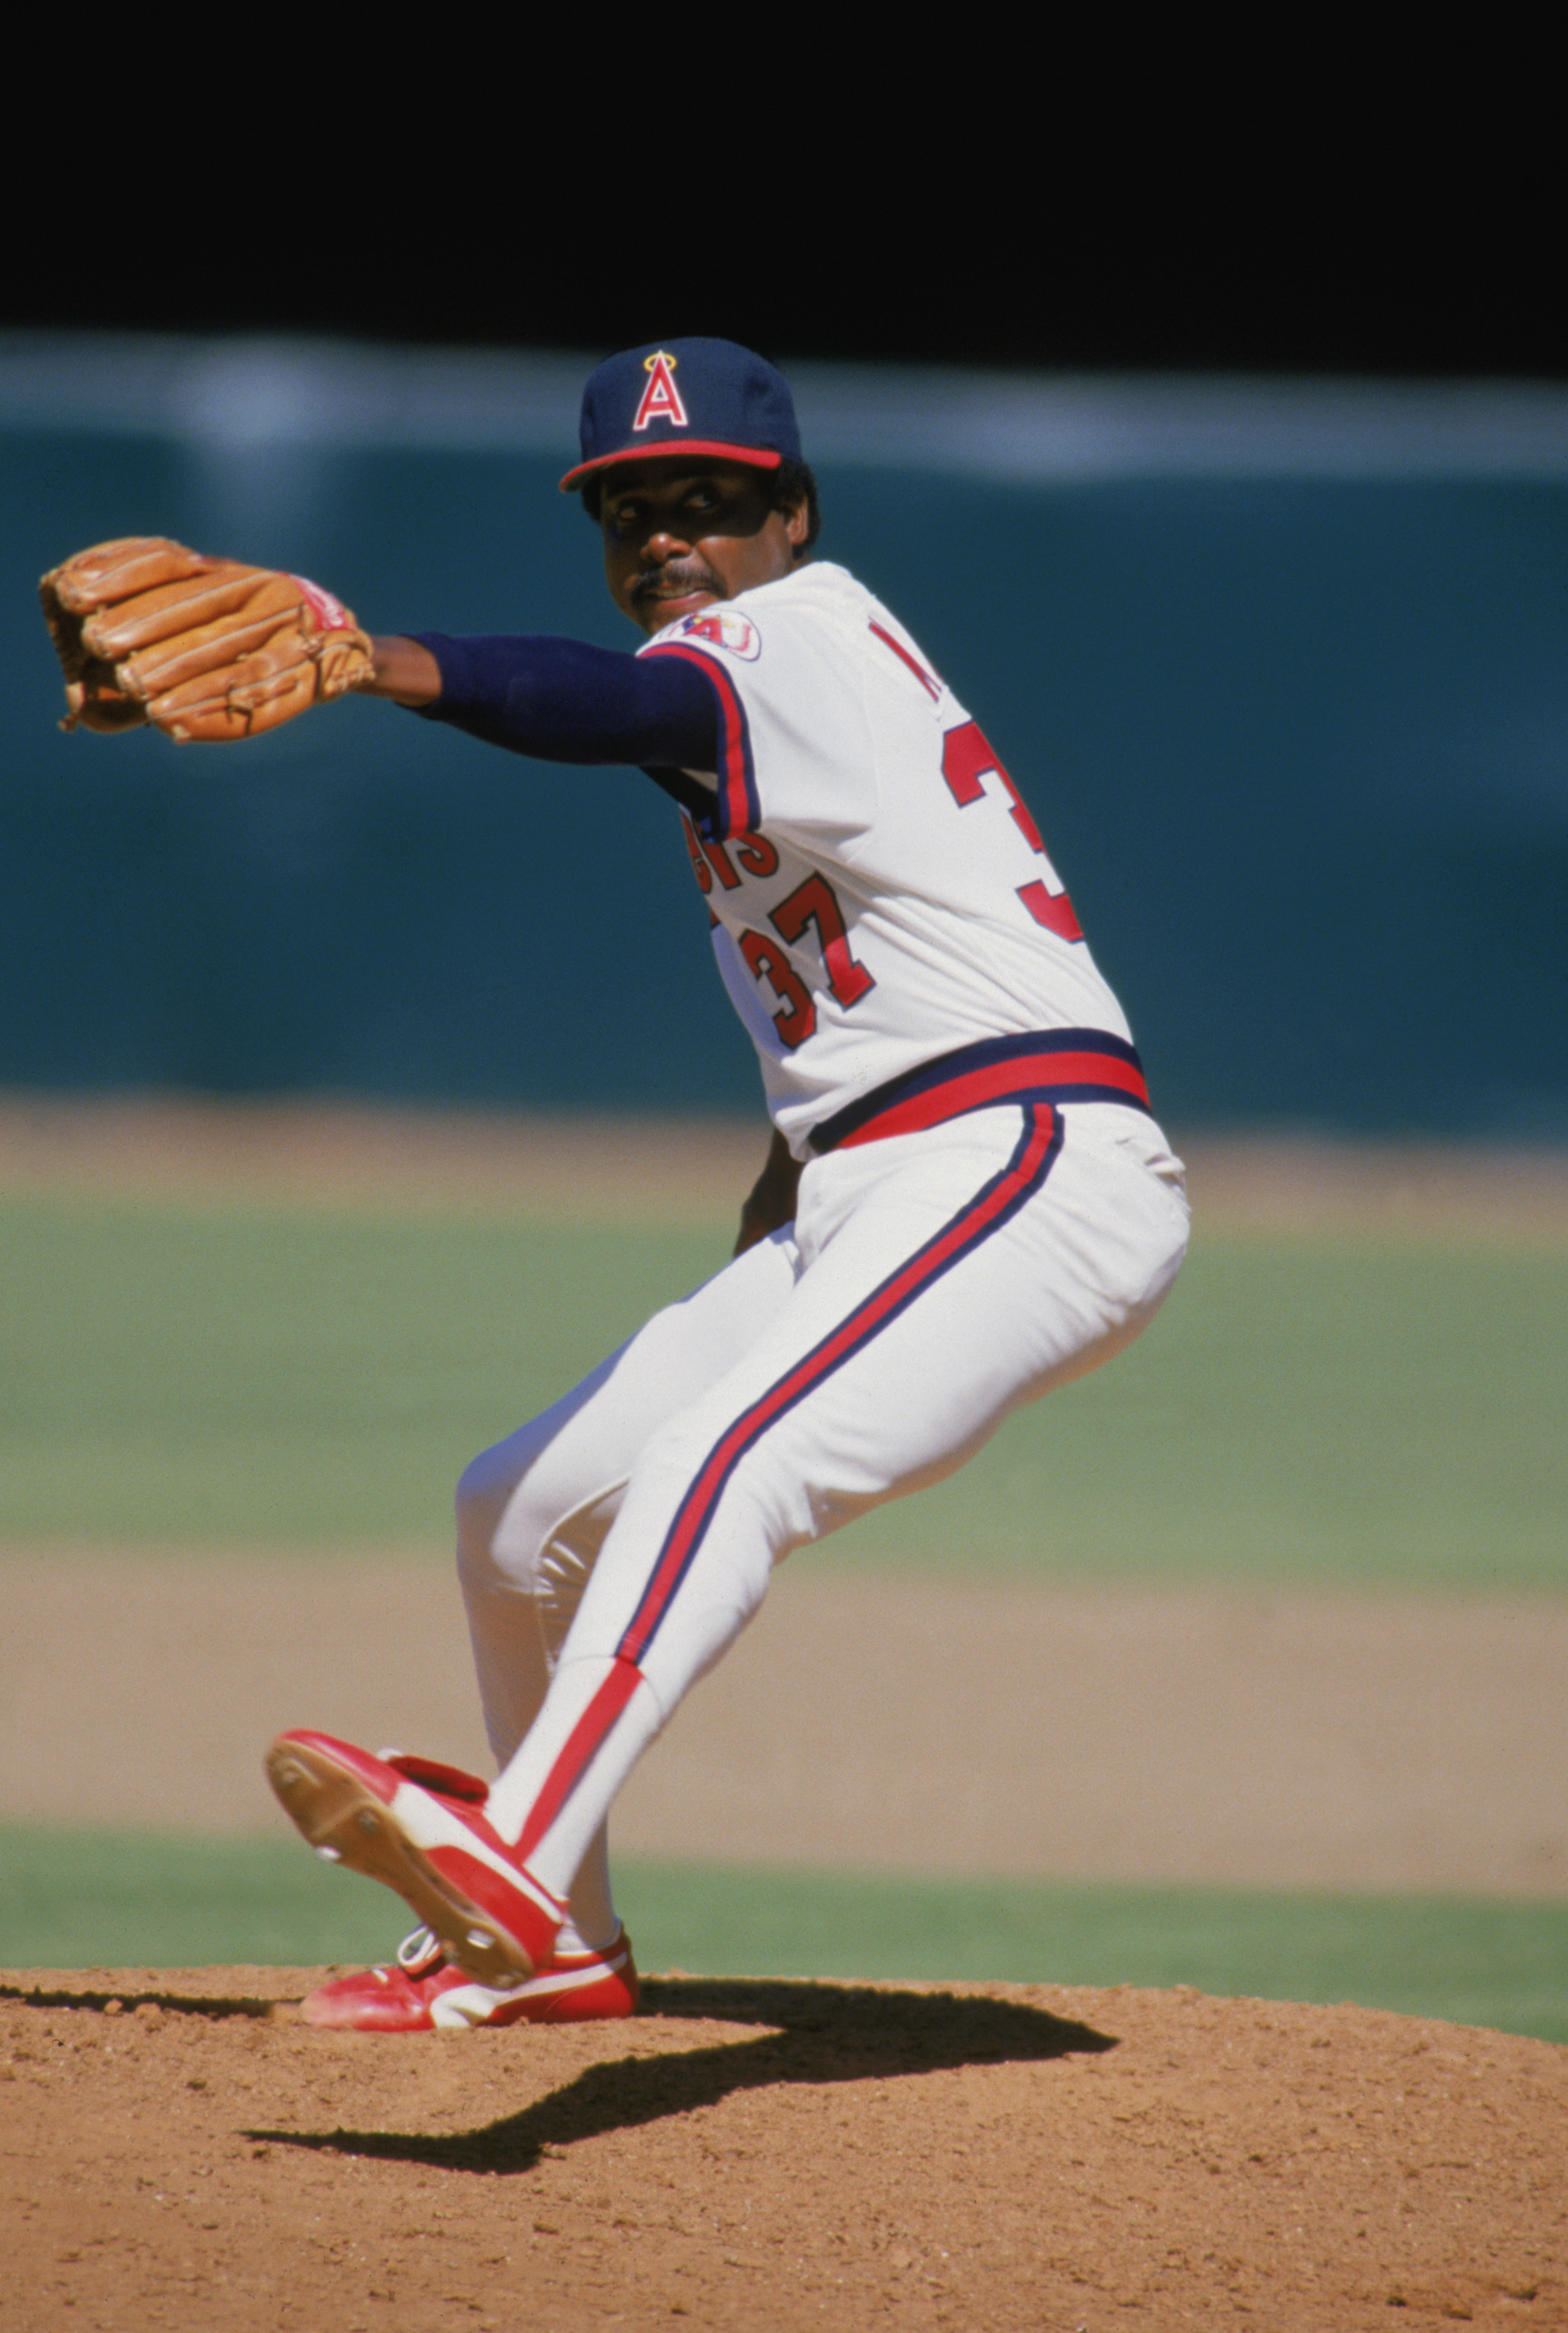 ANAHEIM, CA 1988:  Pitcher Donnie Moore #37 of the California Angels delivers the pitch in a game at Anaheim Stadium during the 1988 season in Anaheim, California.   (Photo by Rick Stewart/Getty Images)